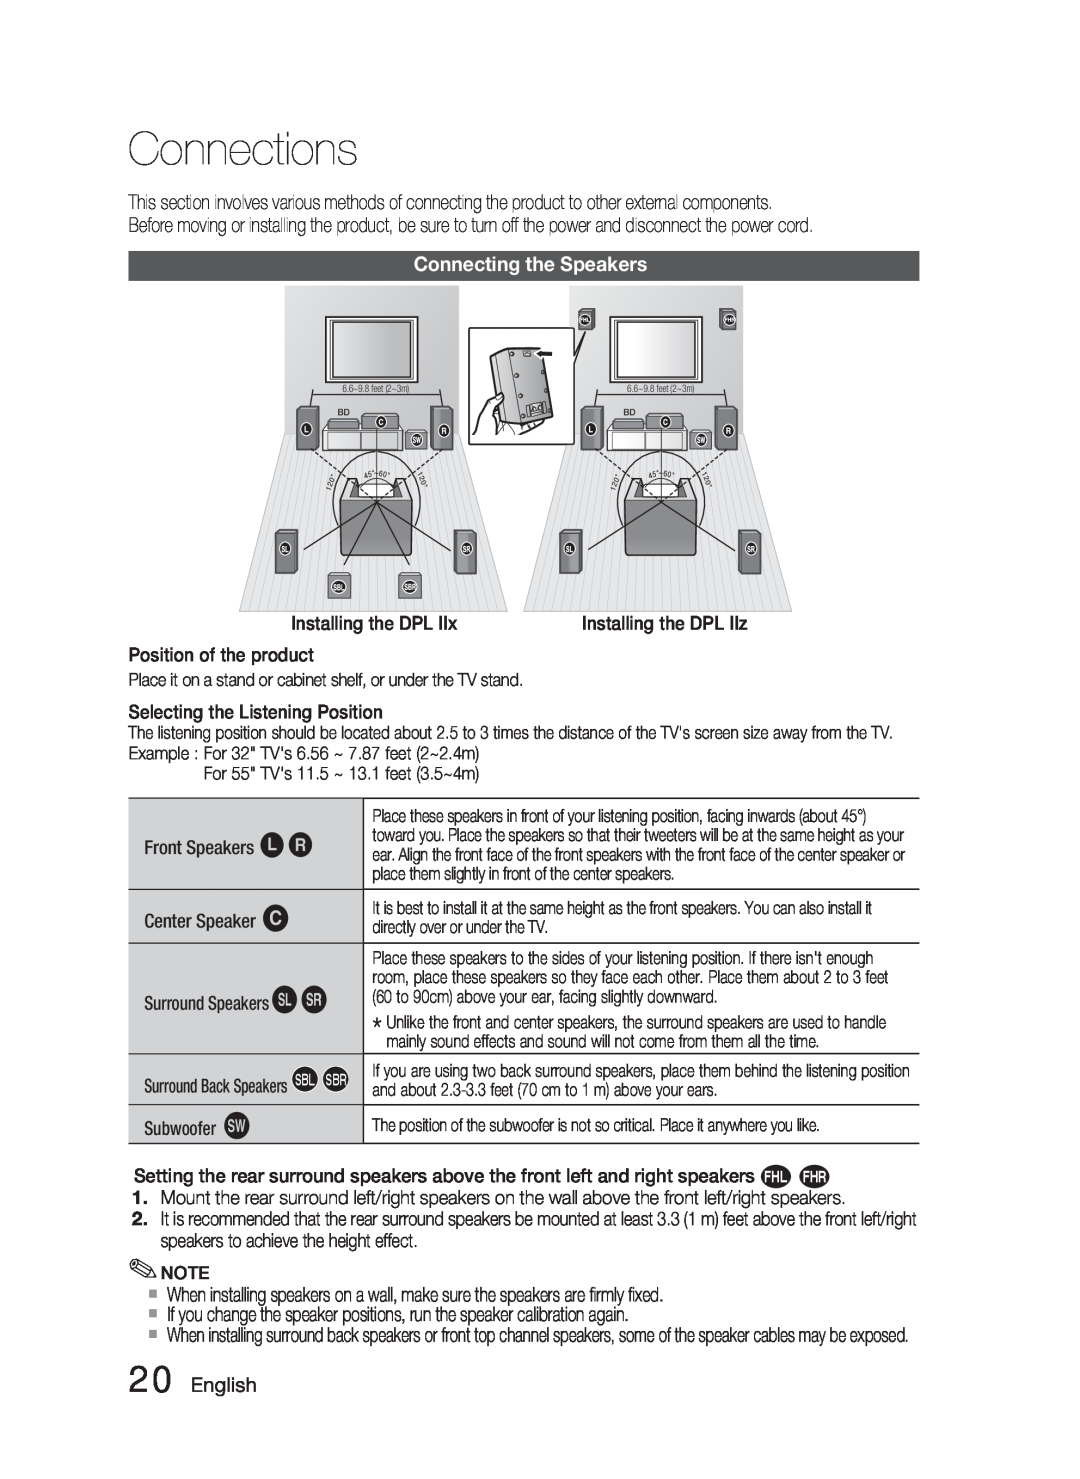 Samsung AH68-02279Y user manual Connections, Connecting the Speakers, English 